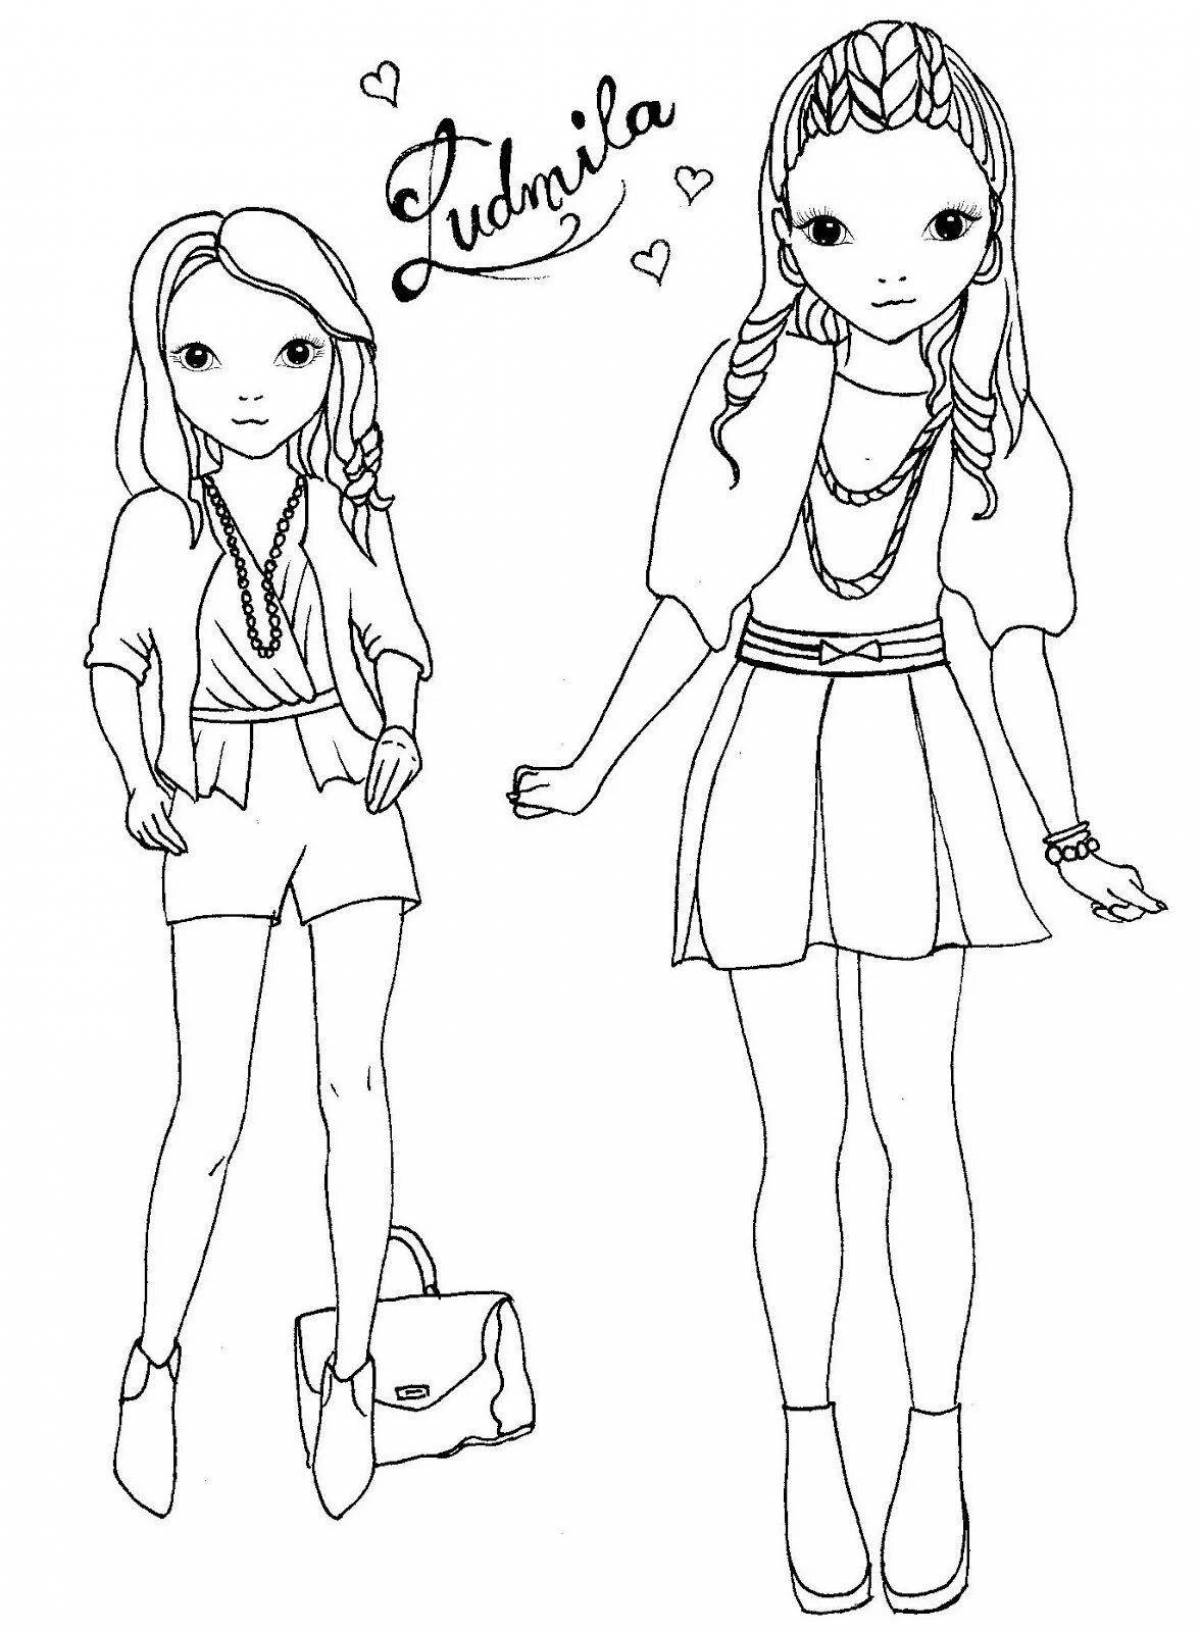 Coloring page unique fashion for girls